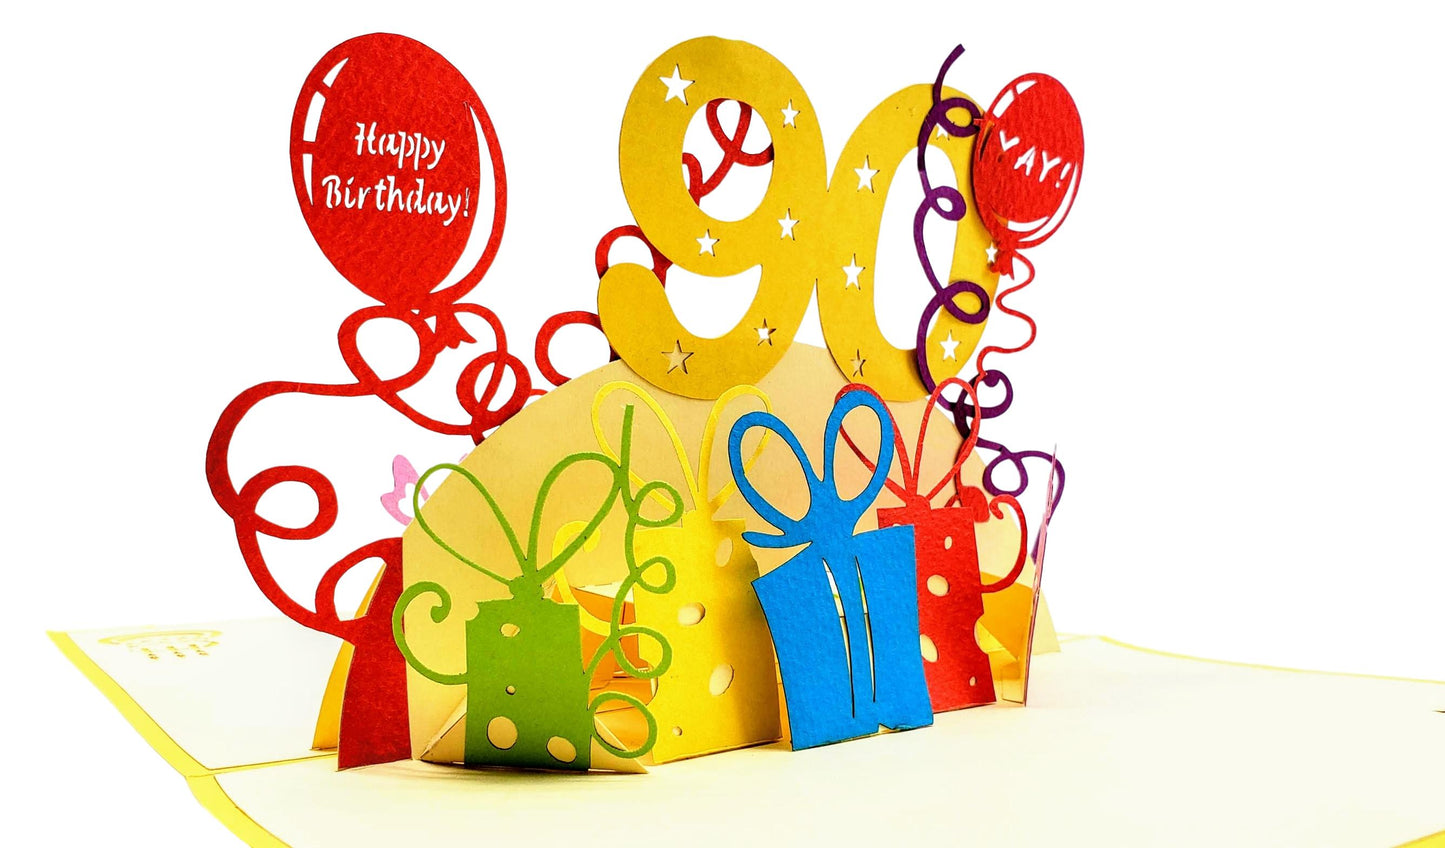 Happy 90th Birthday With Lots of Presents 3D Pop Up Greeting Card - Age - best deal - Birthday - iGifts And Cards